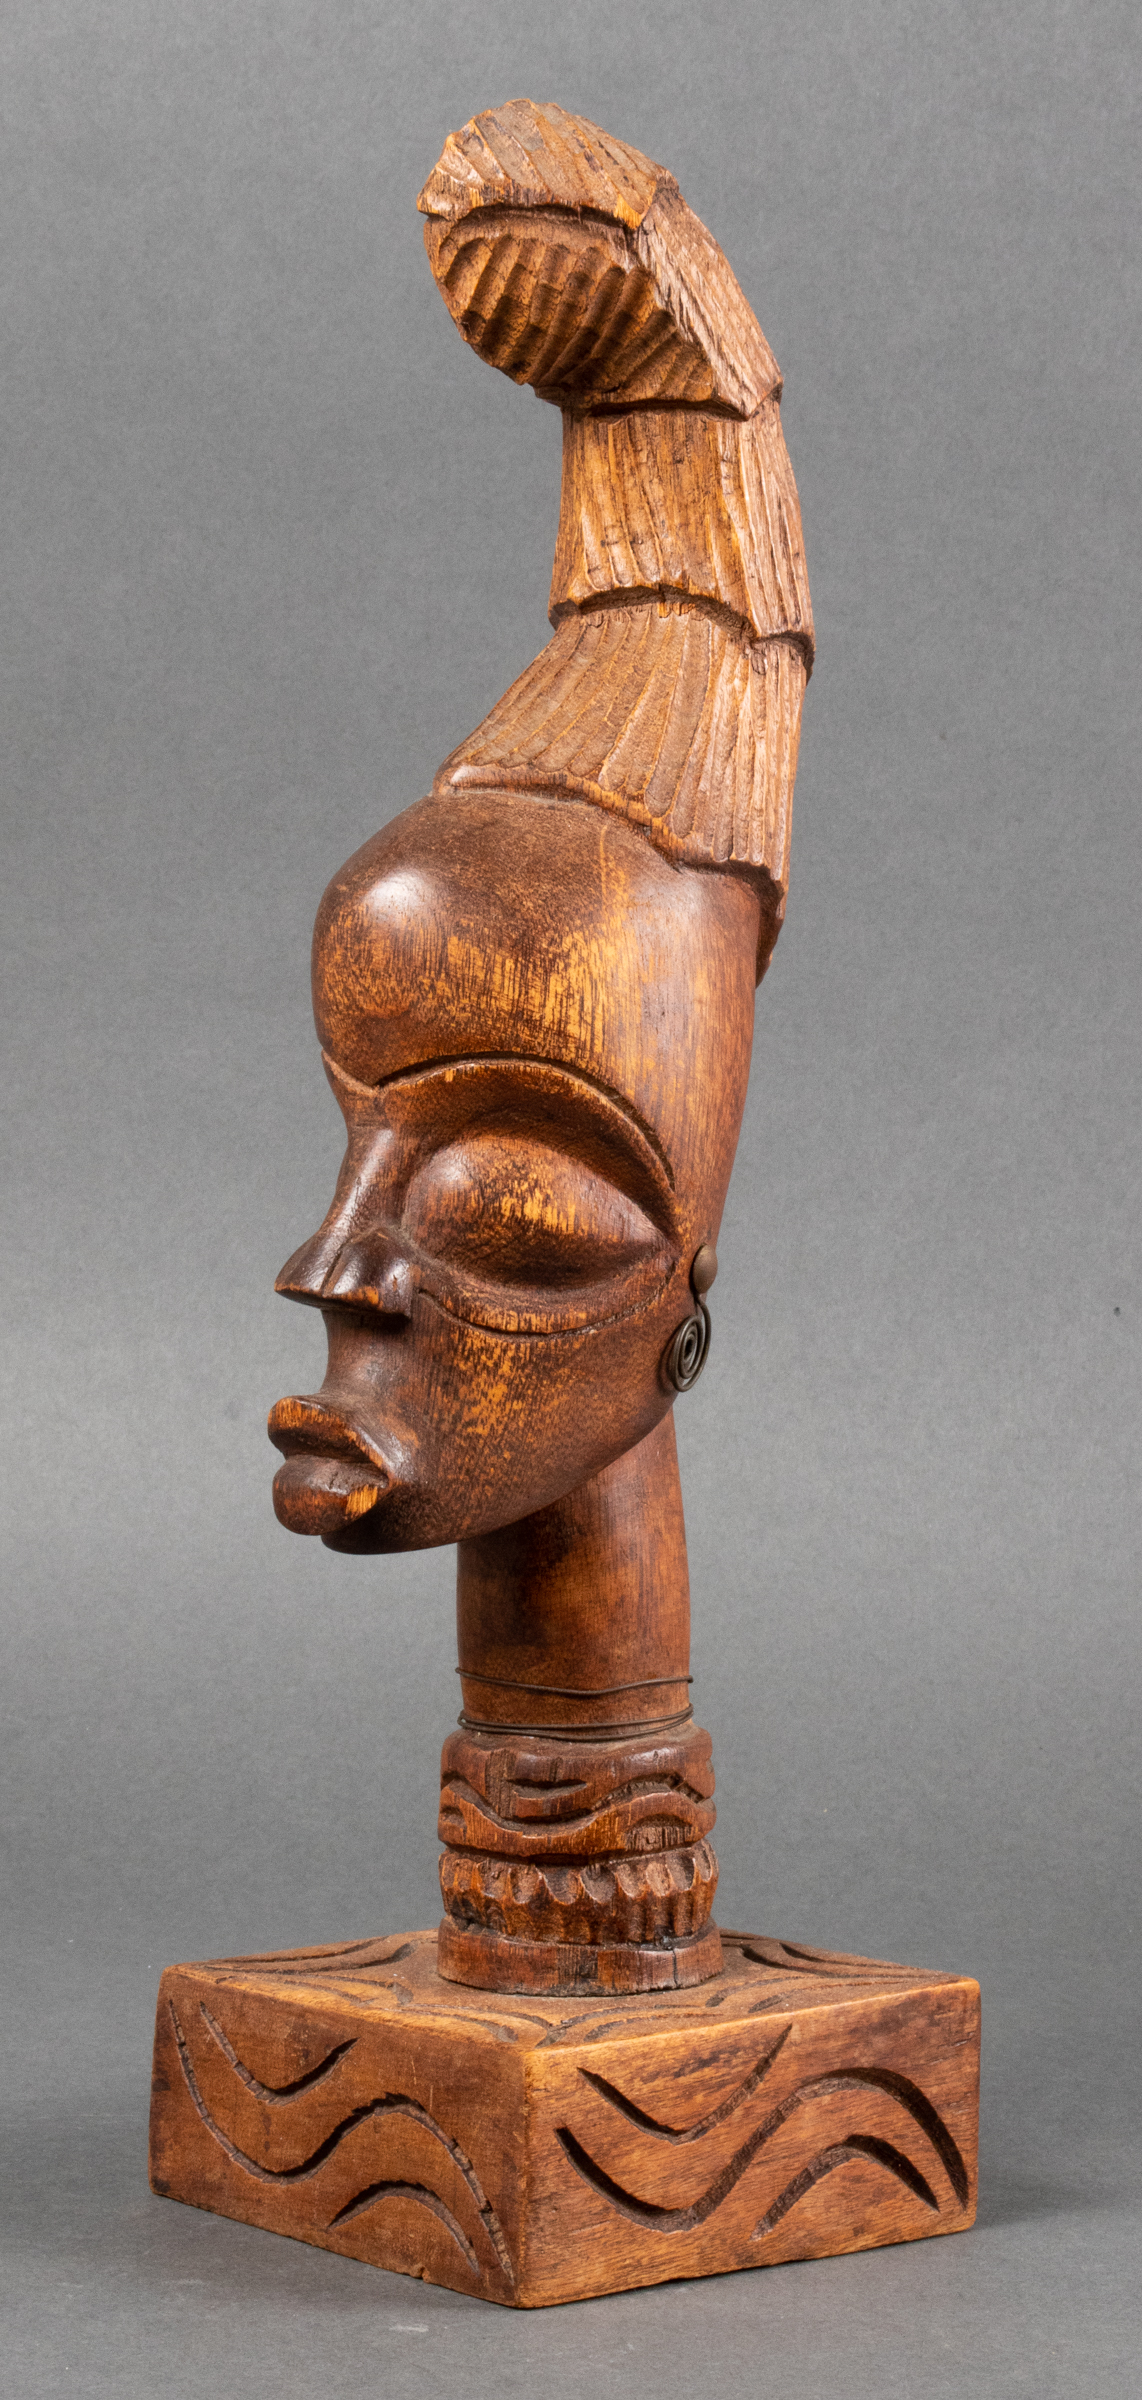 MATINO AFRICAN CARVED WOOD HEAD 3c2e4c